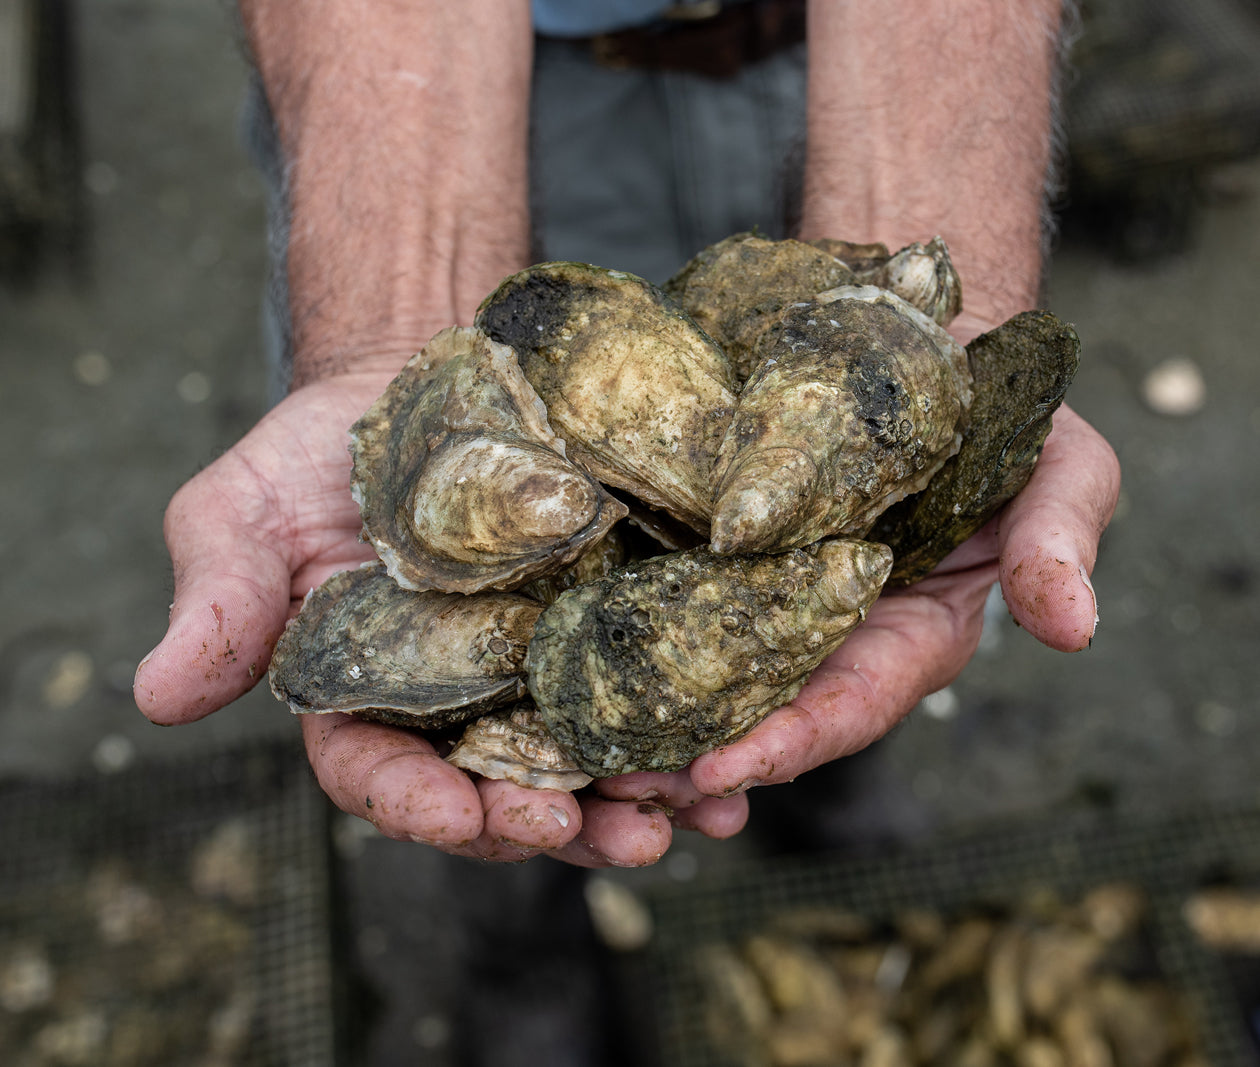 Paines Creek Oysters from Brewster, MA